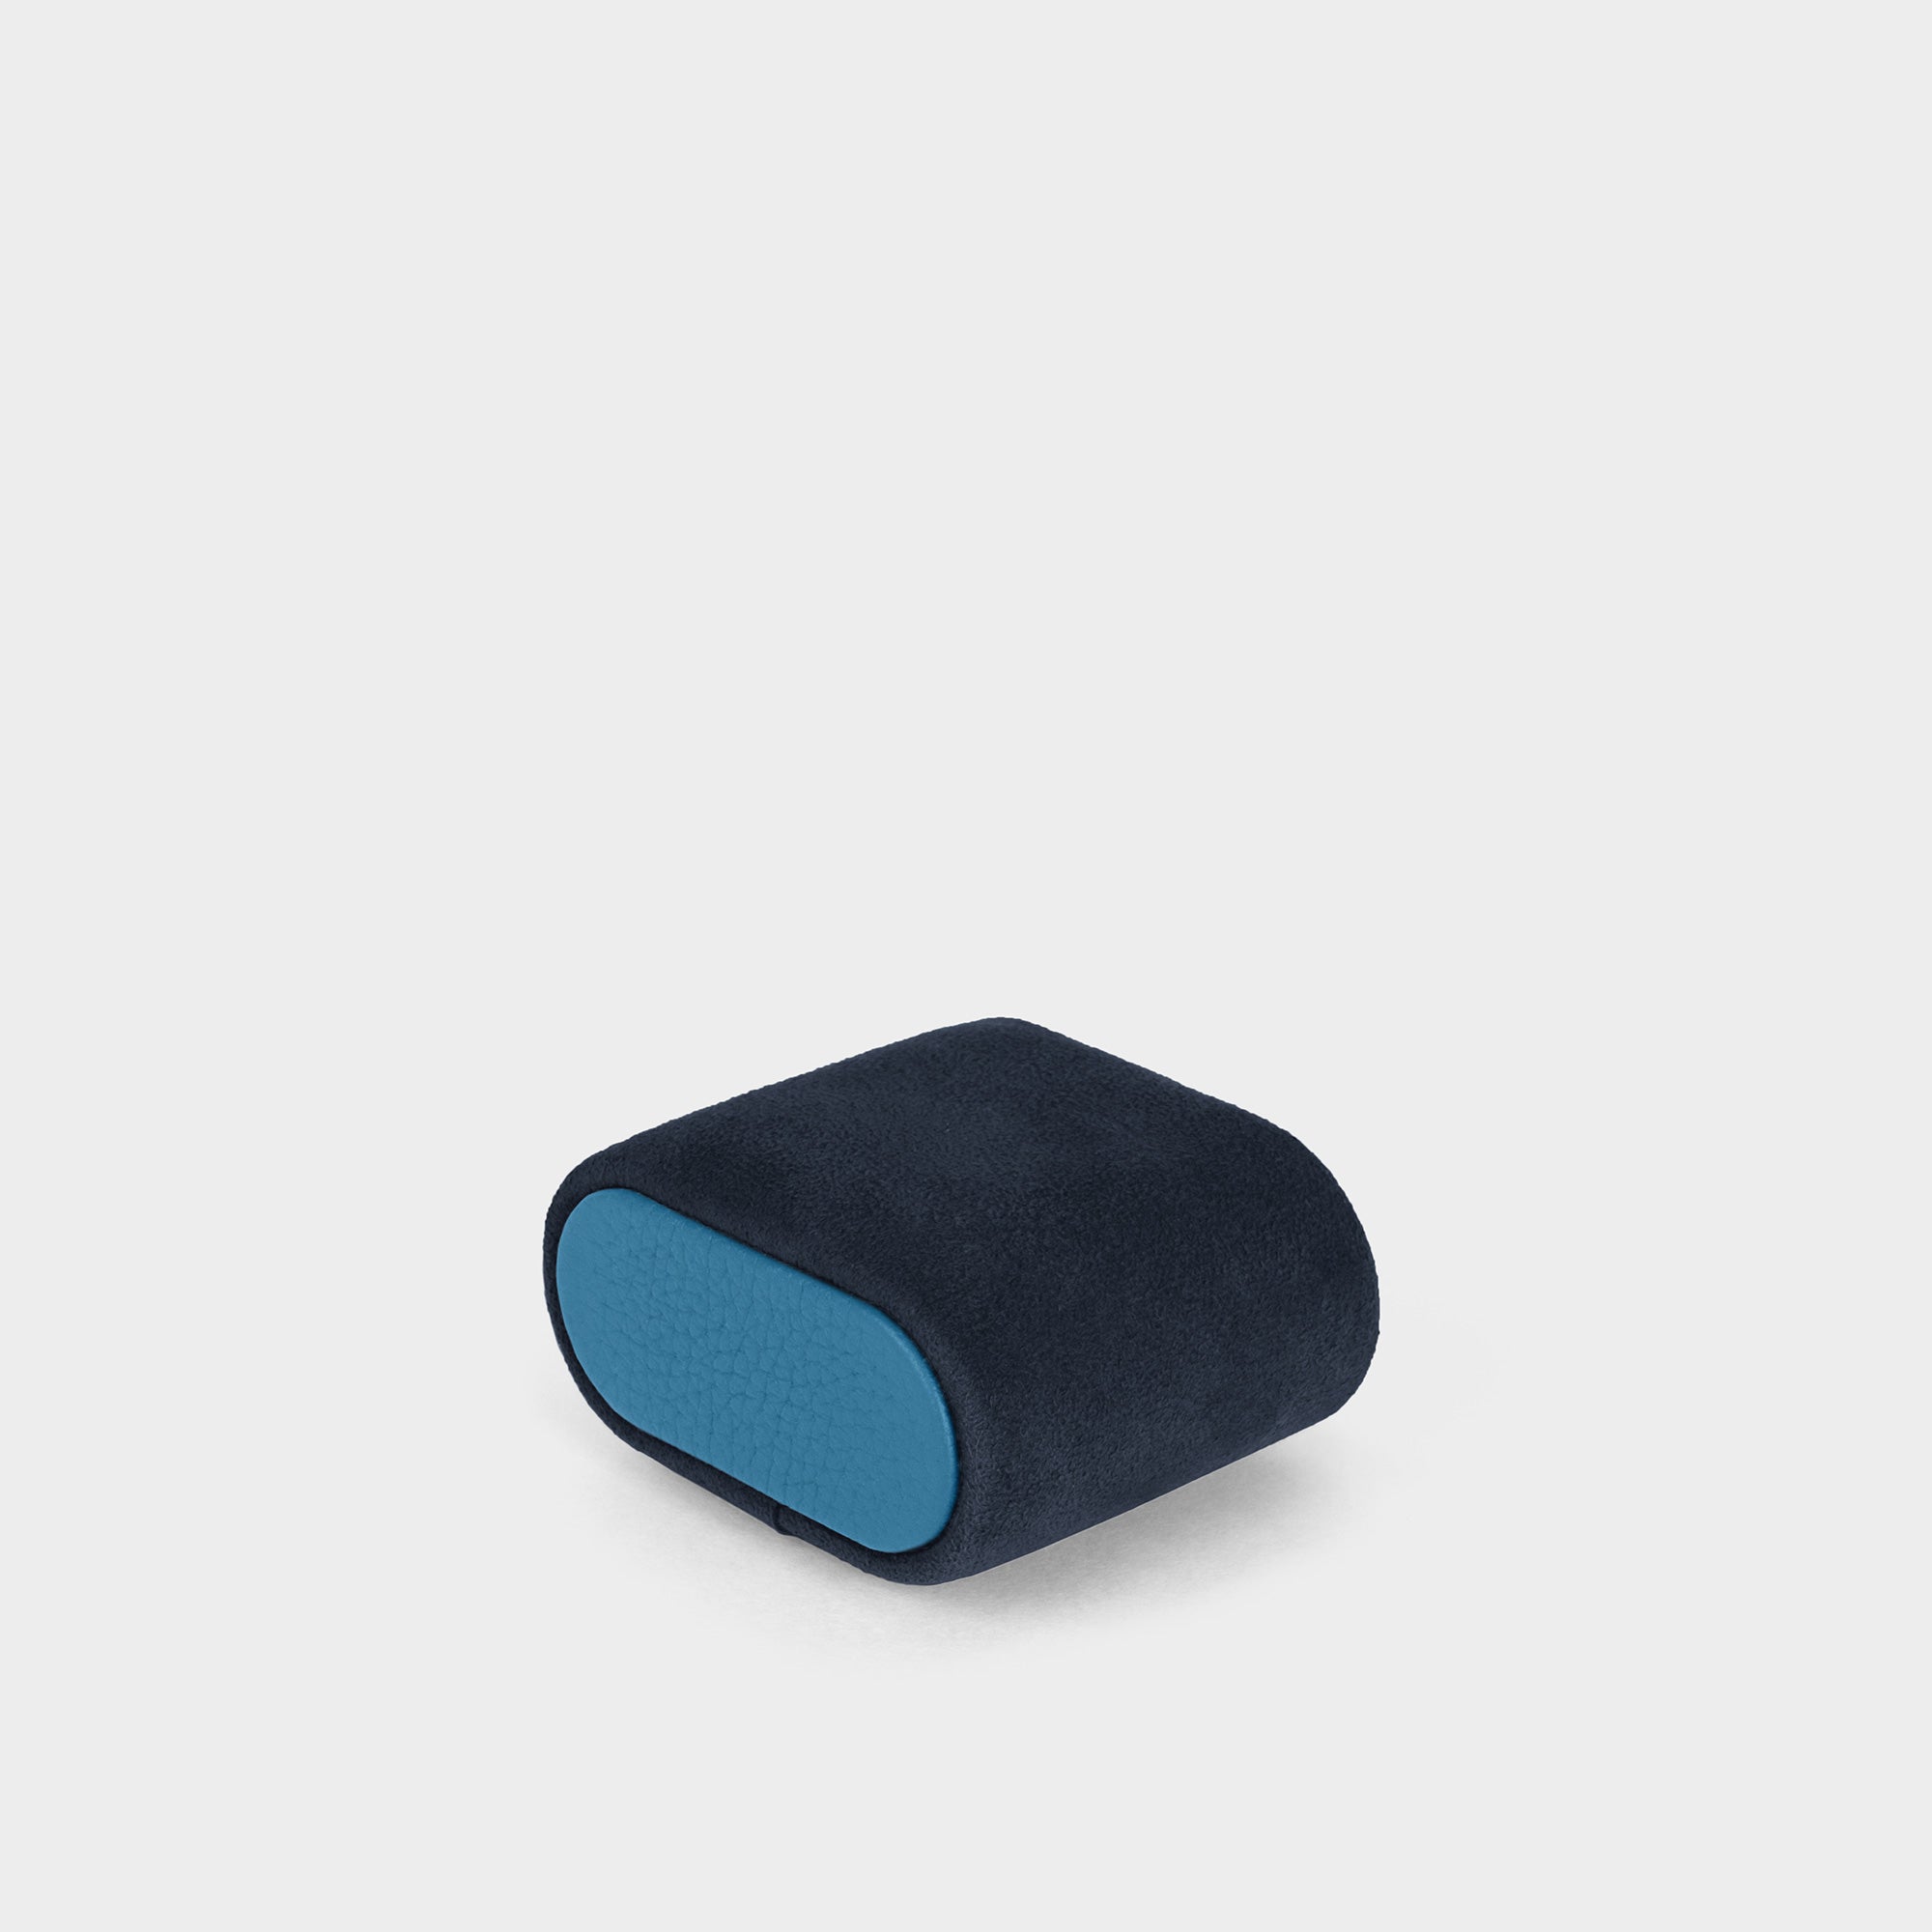 Removable Alcantara watch cushion with sky blue leather side accents